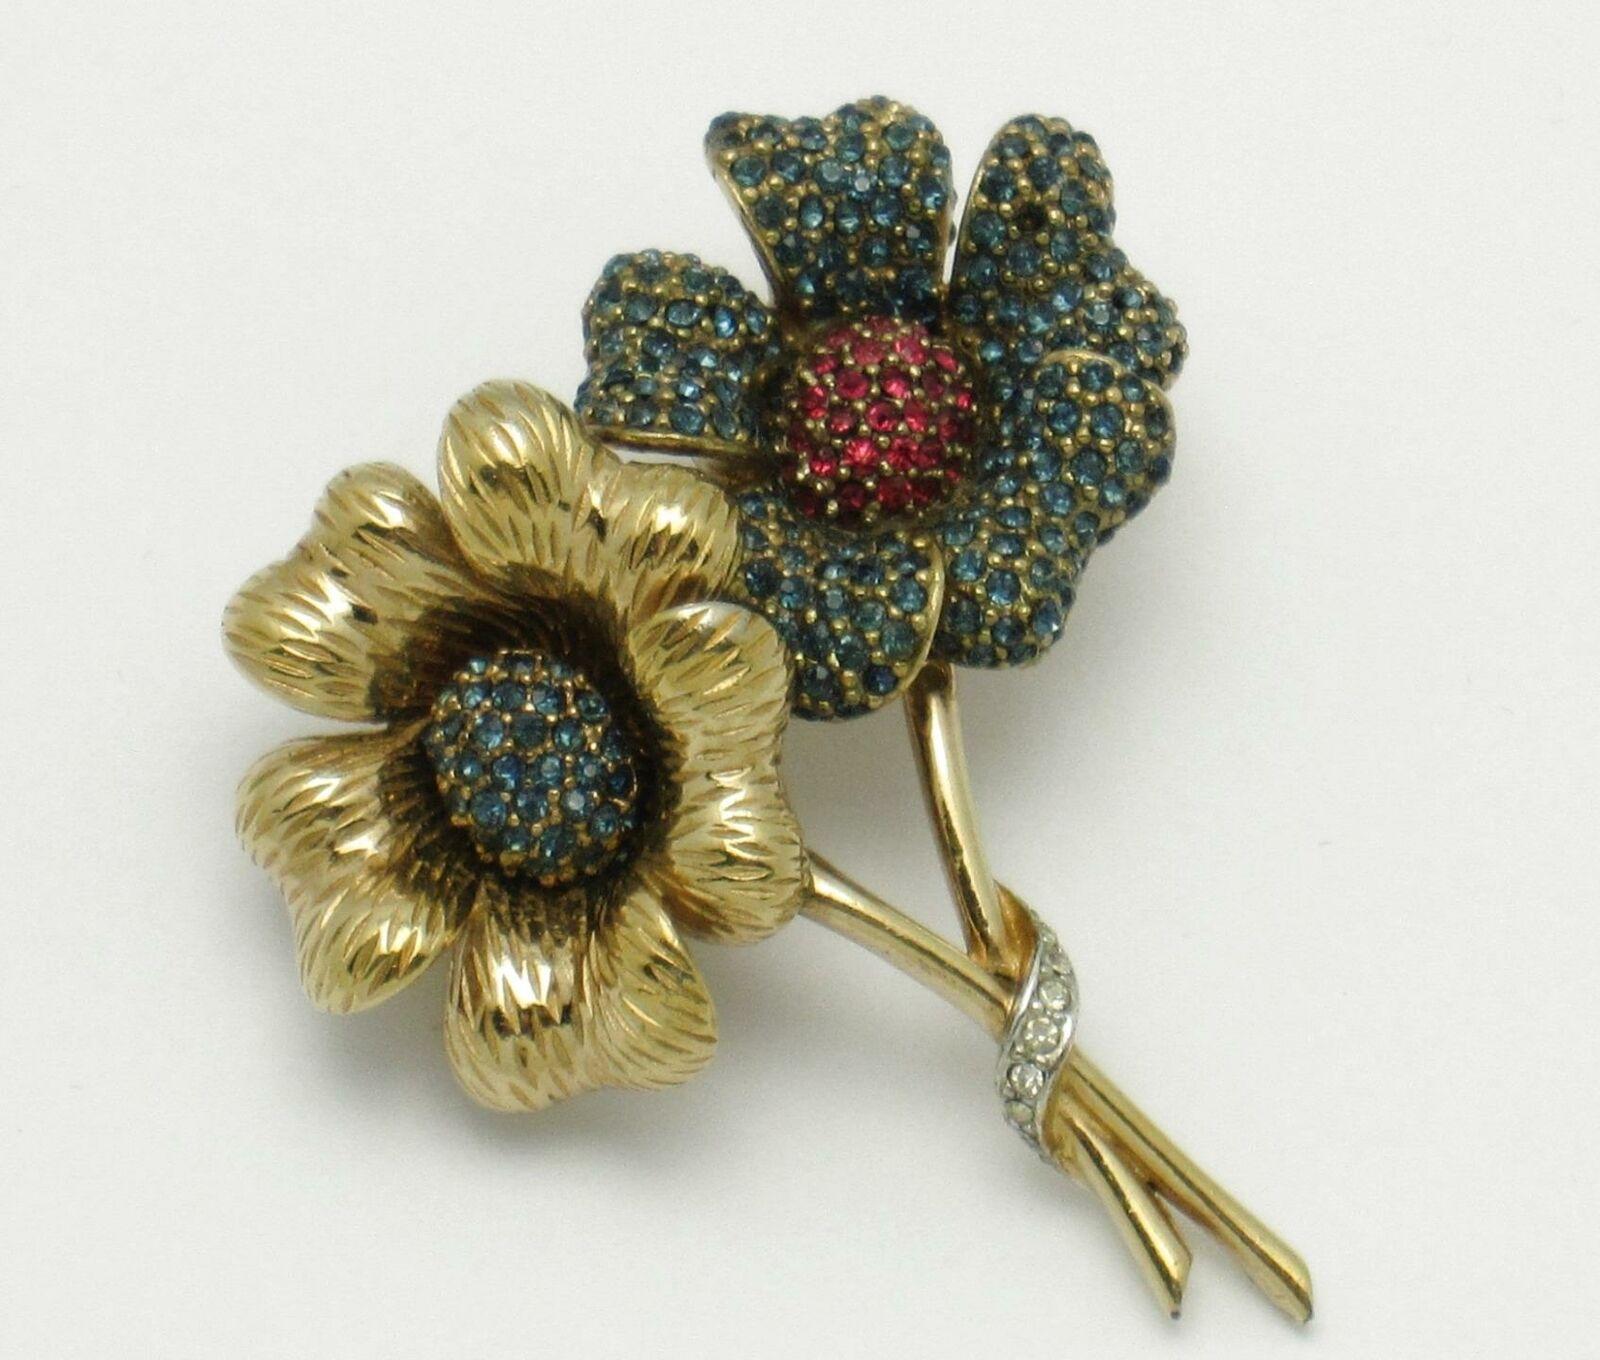 Beautiful Designer CINER Large Vintage Crystal and Gold plated Double Flower Brooch. One flower displays ornate gold plated petals with a mound of blue Sapphire Crystals at the center. The petals on the other flower are encrusted with Sapphire blue